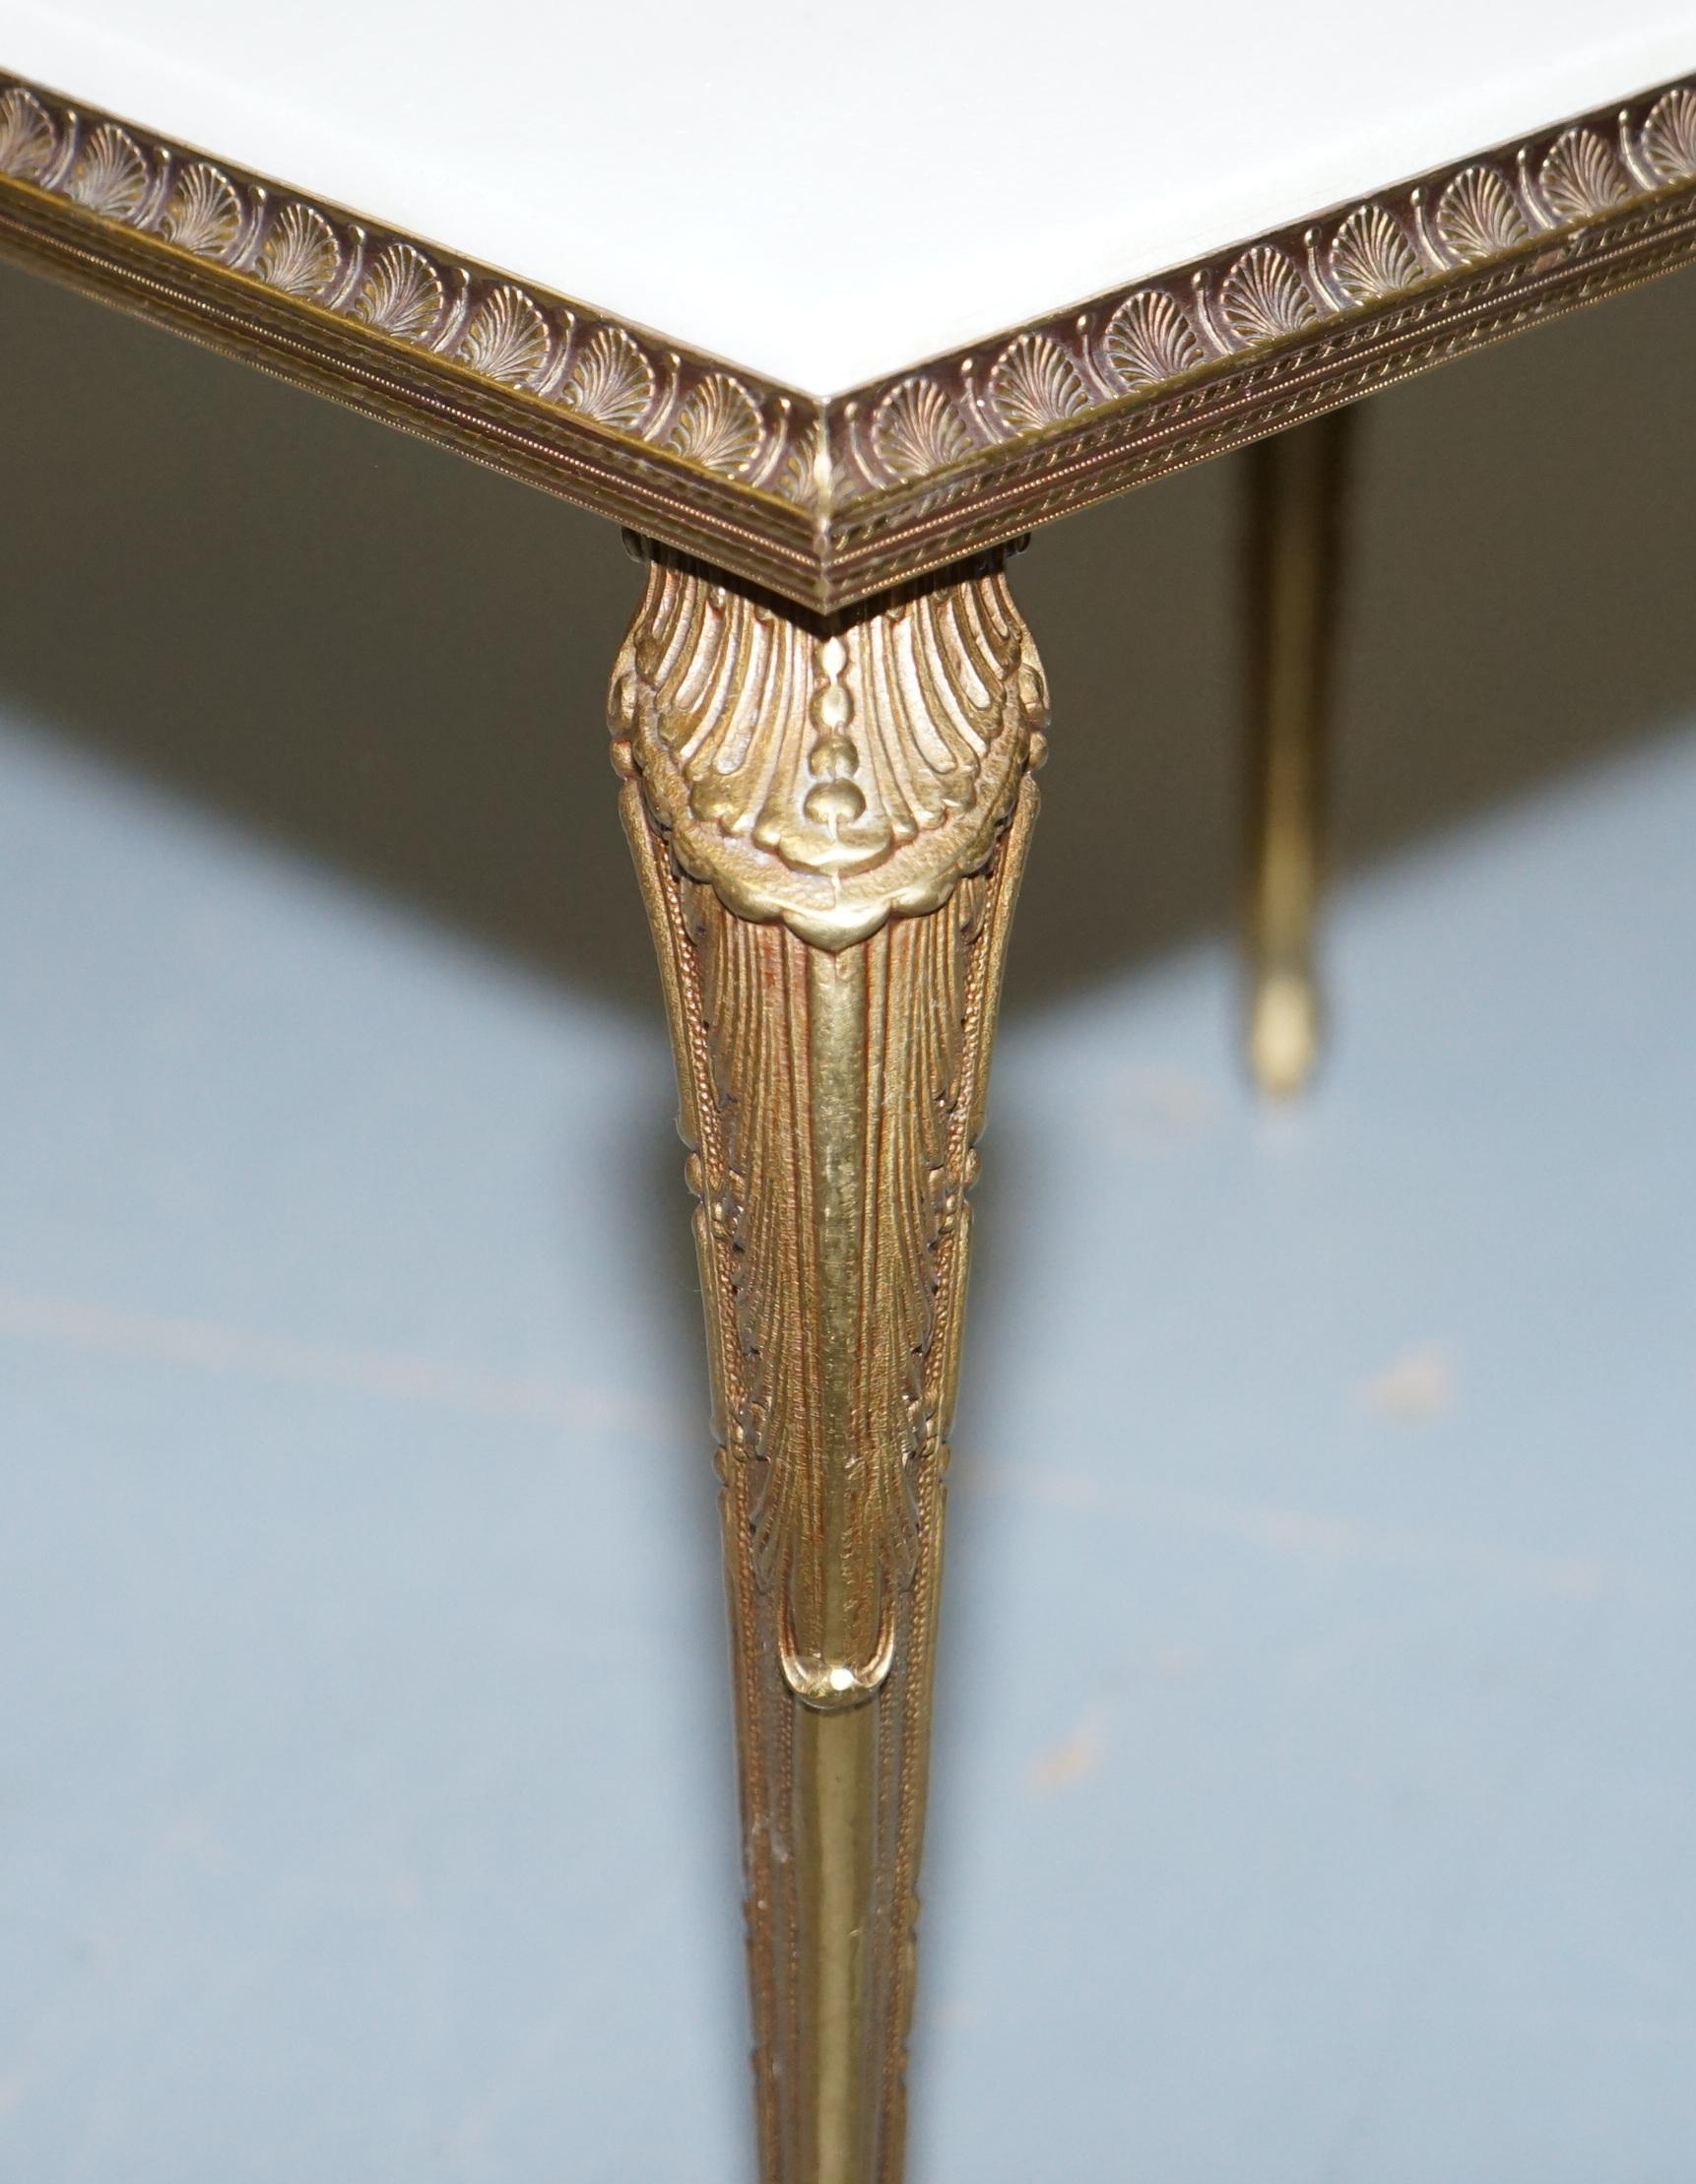 Pair of Lovely circa 1900 French Brass Framed Side Tables Italian Marble Tops For Sale 6